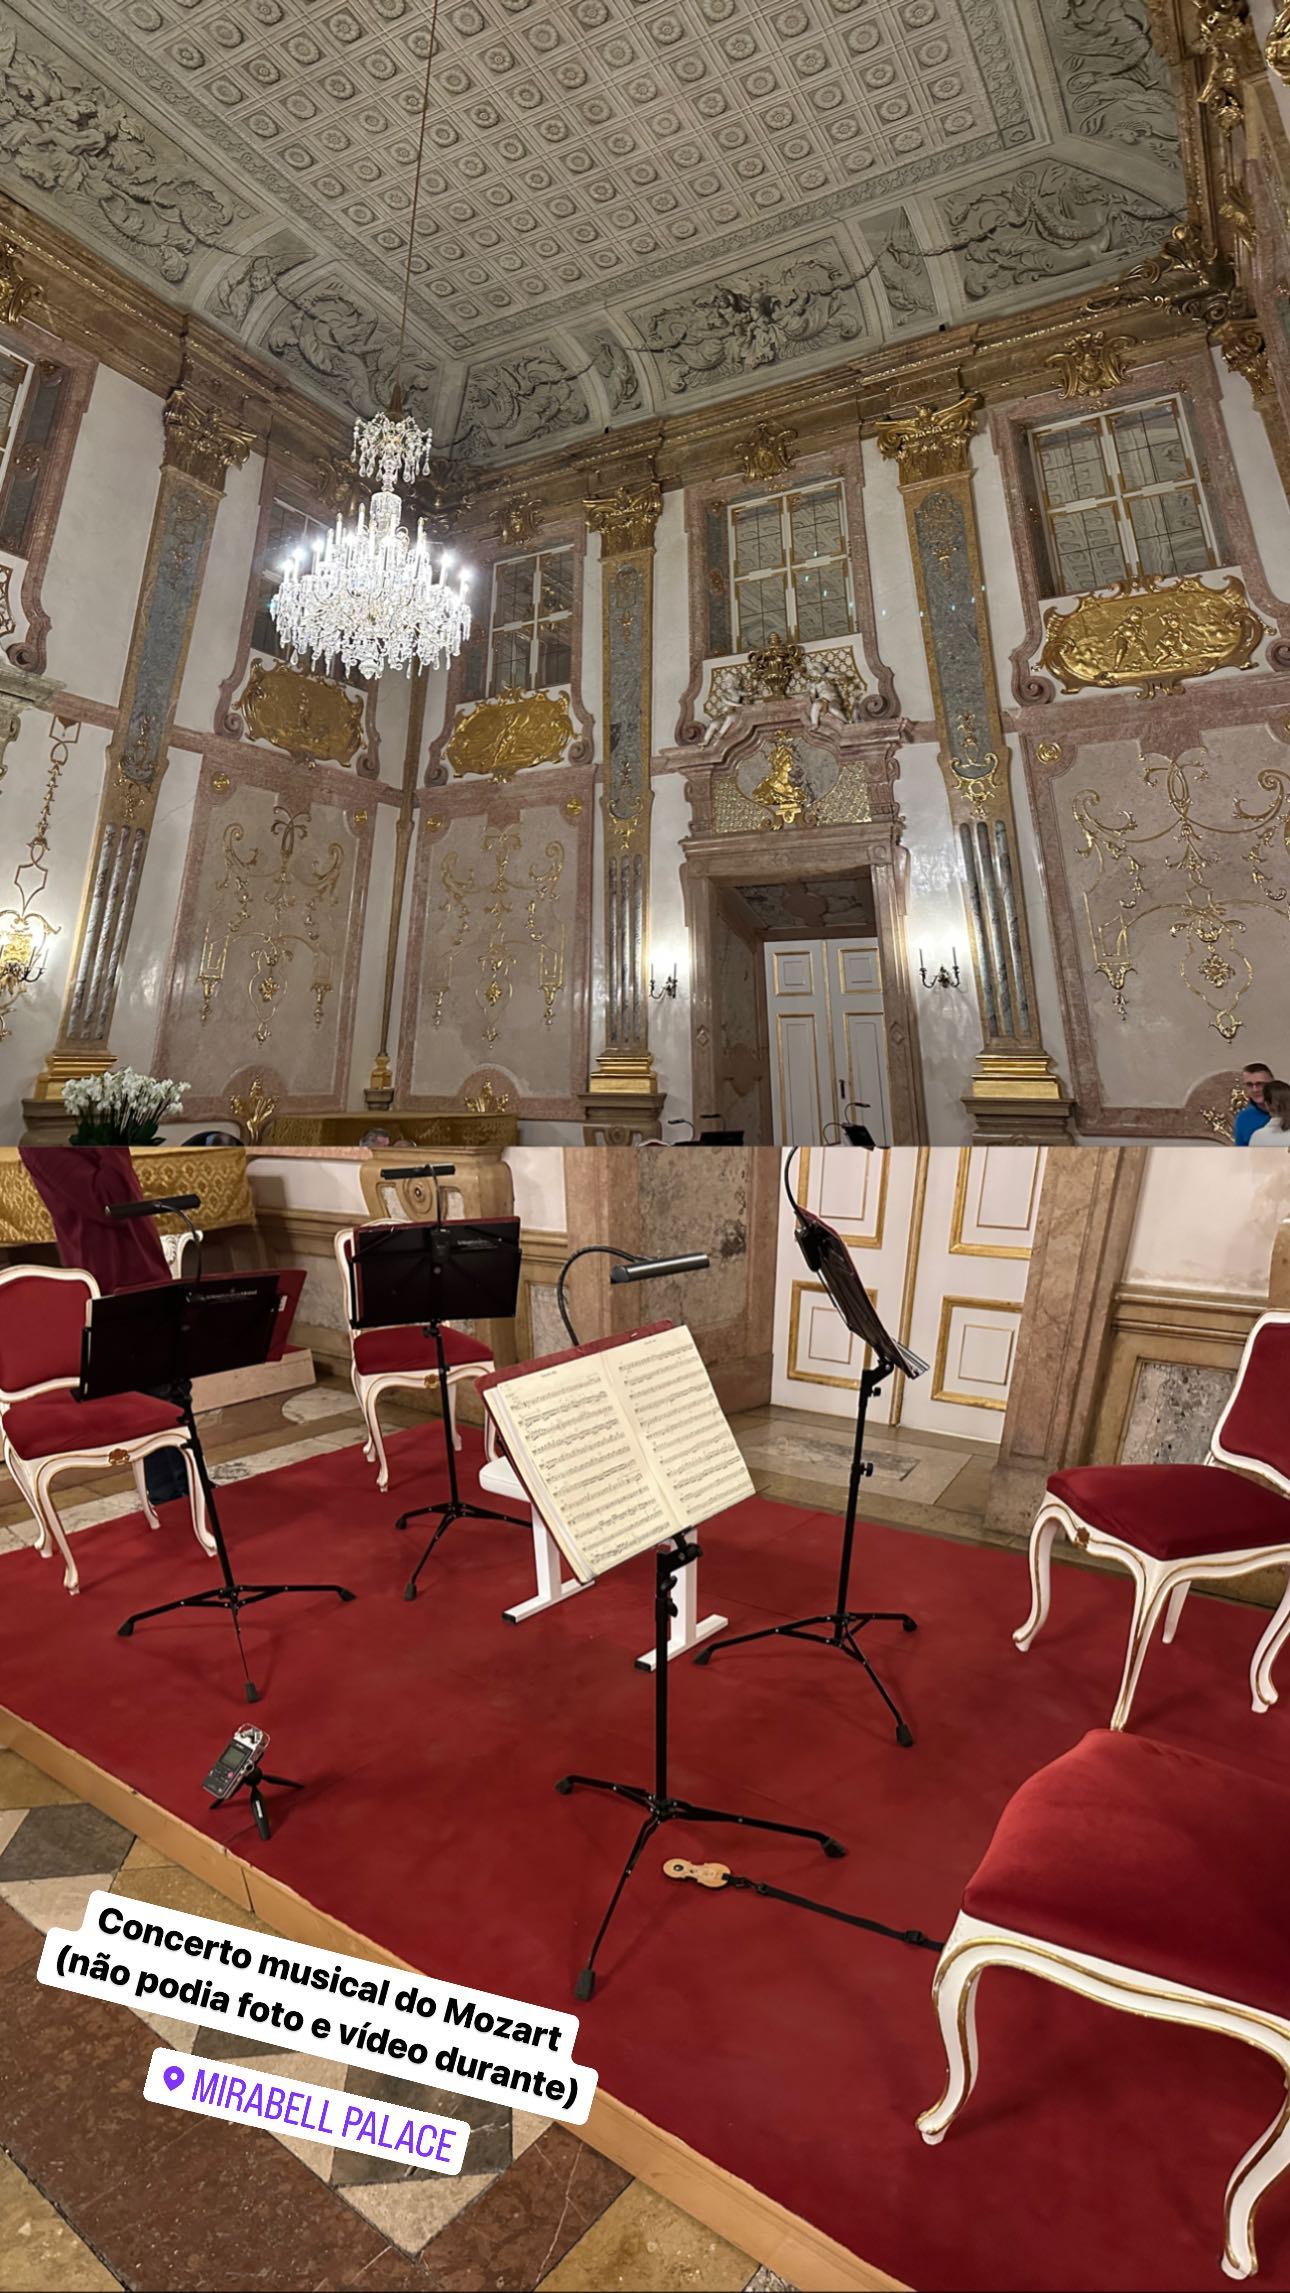 Mozart's musical concert (could not photo and video during)